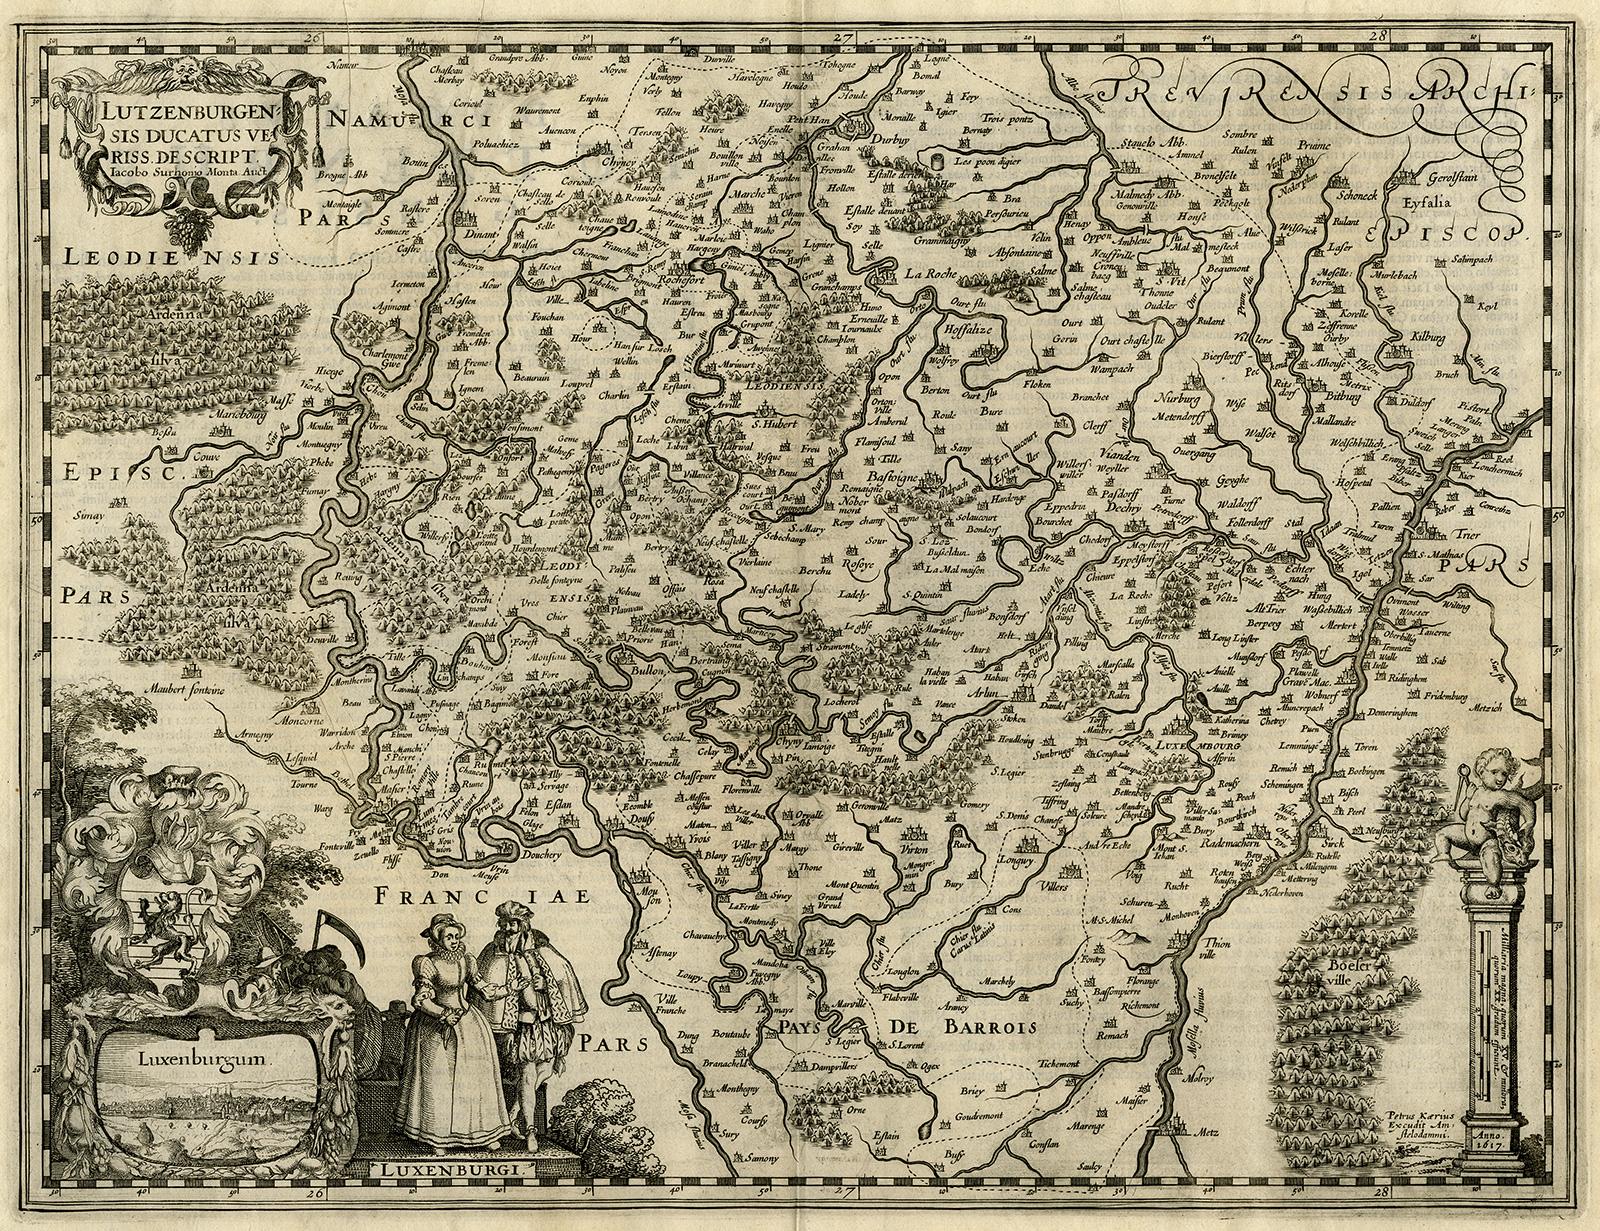 Pieter van den Keere Print - Antique map of Luxembourg and its region by Kaerius - Engraving - 17th c.